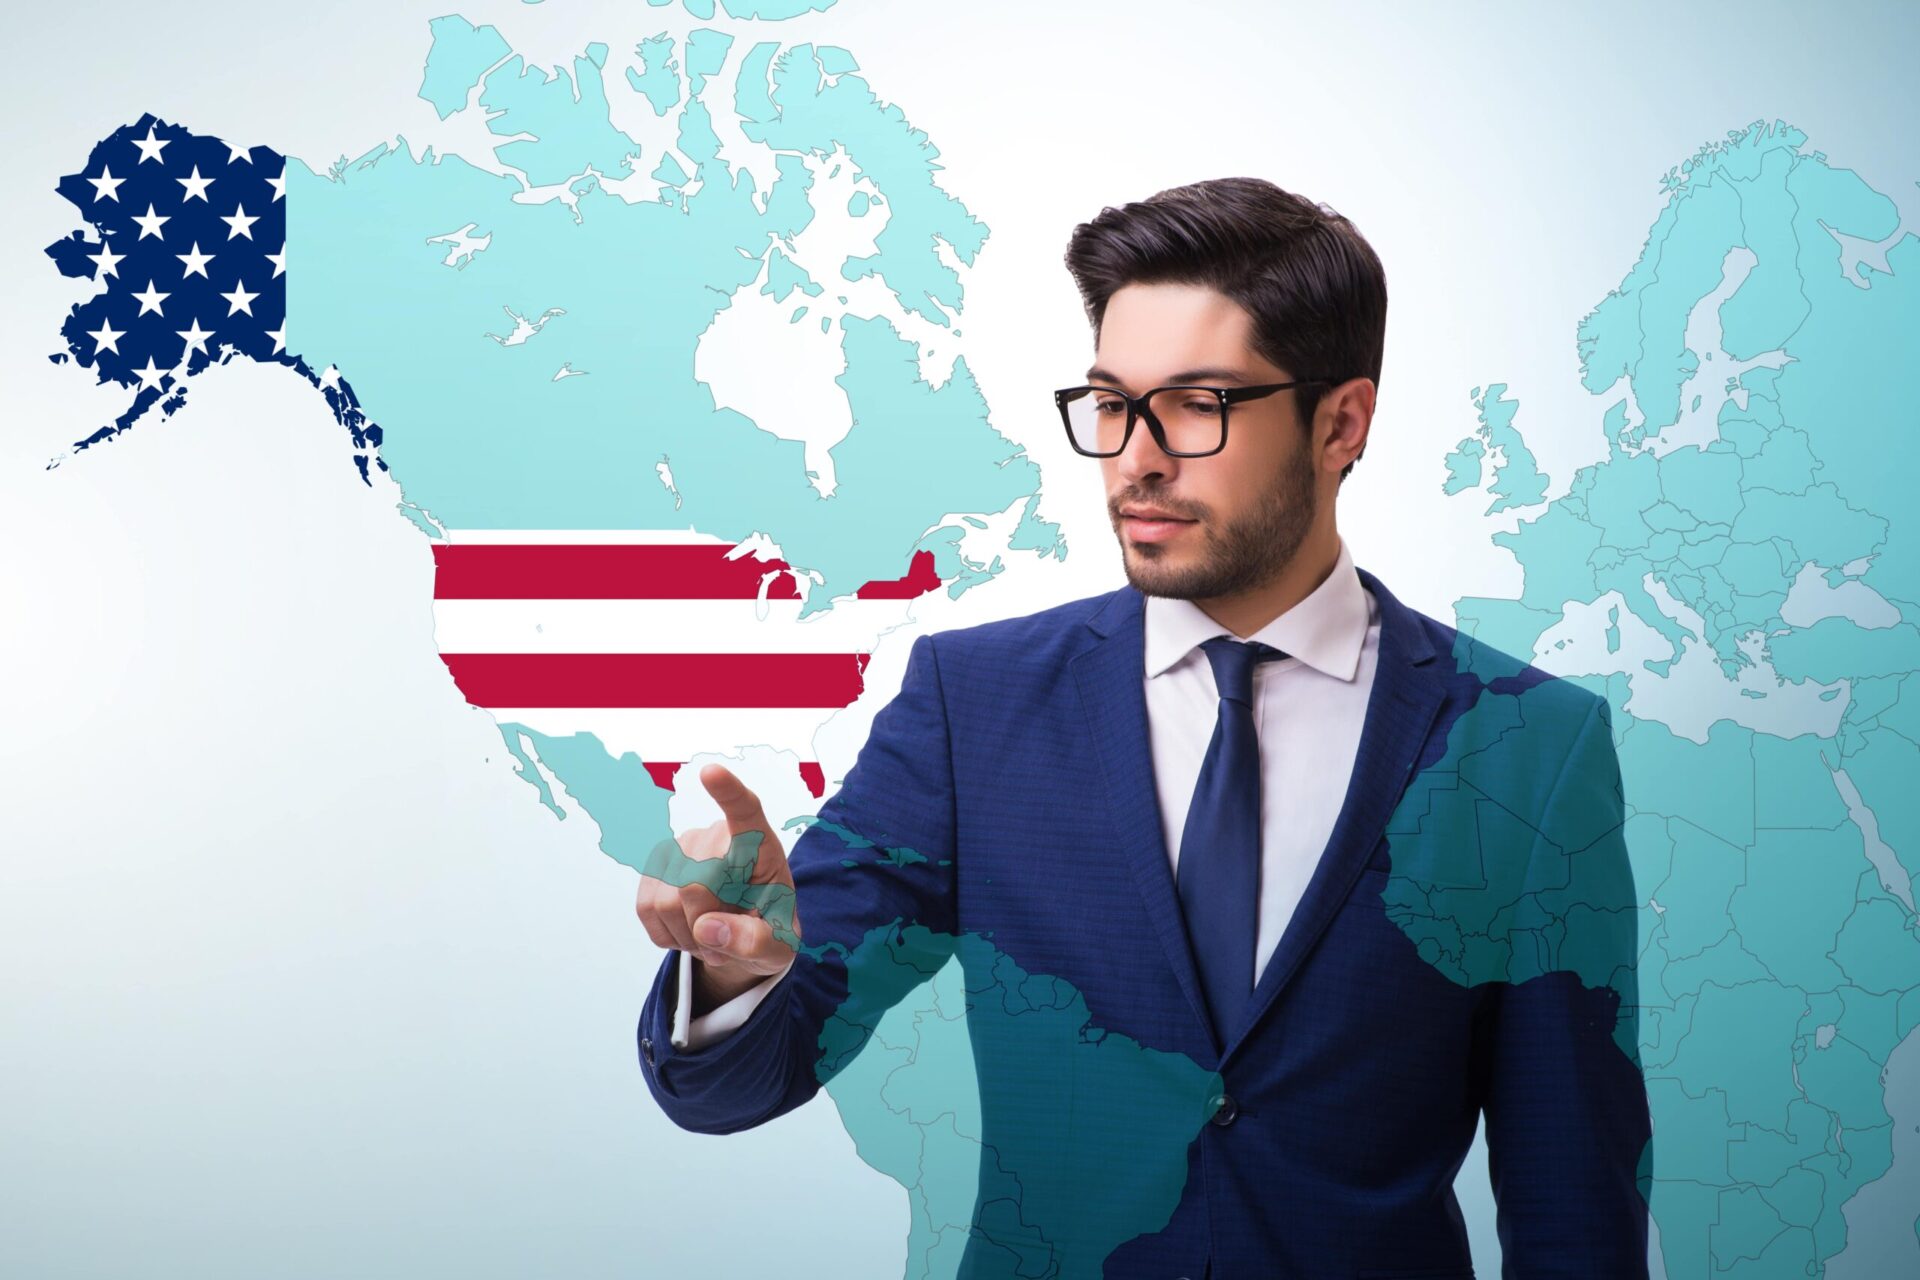 How to Do Business Online in the U.S. from Another Country